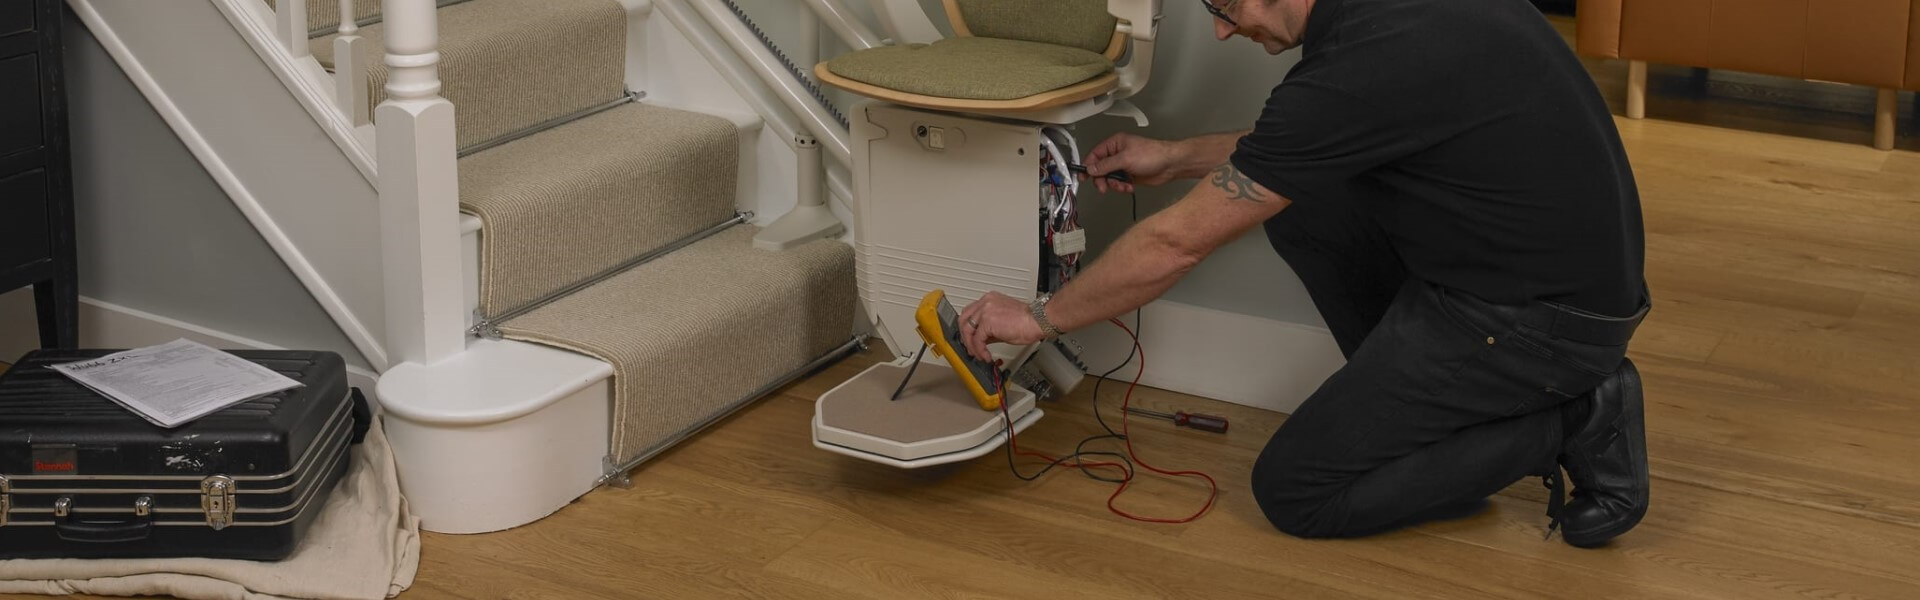 Stannah Stairlifts